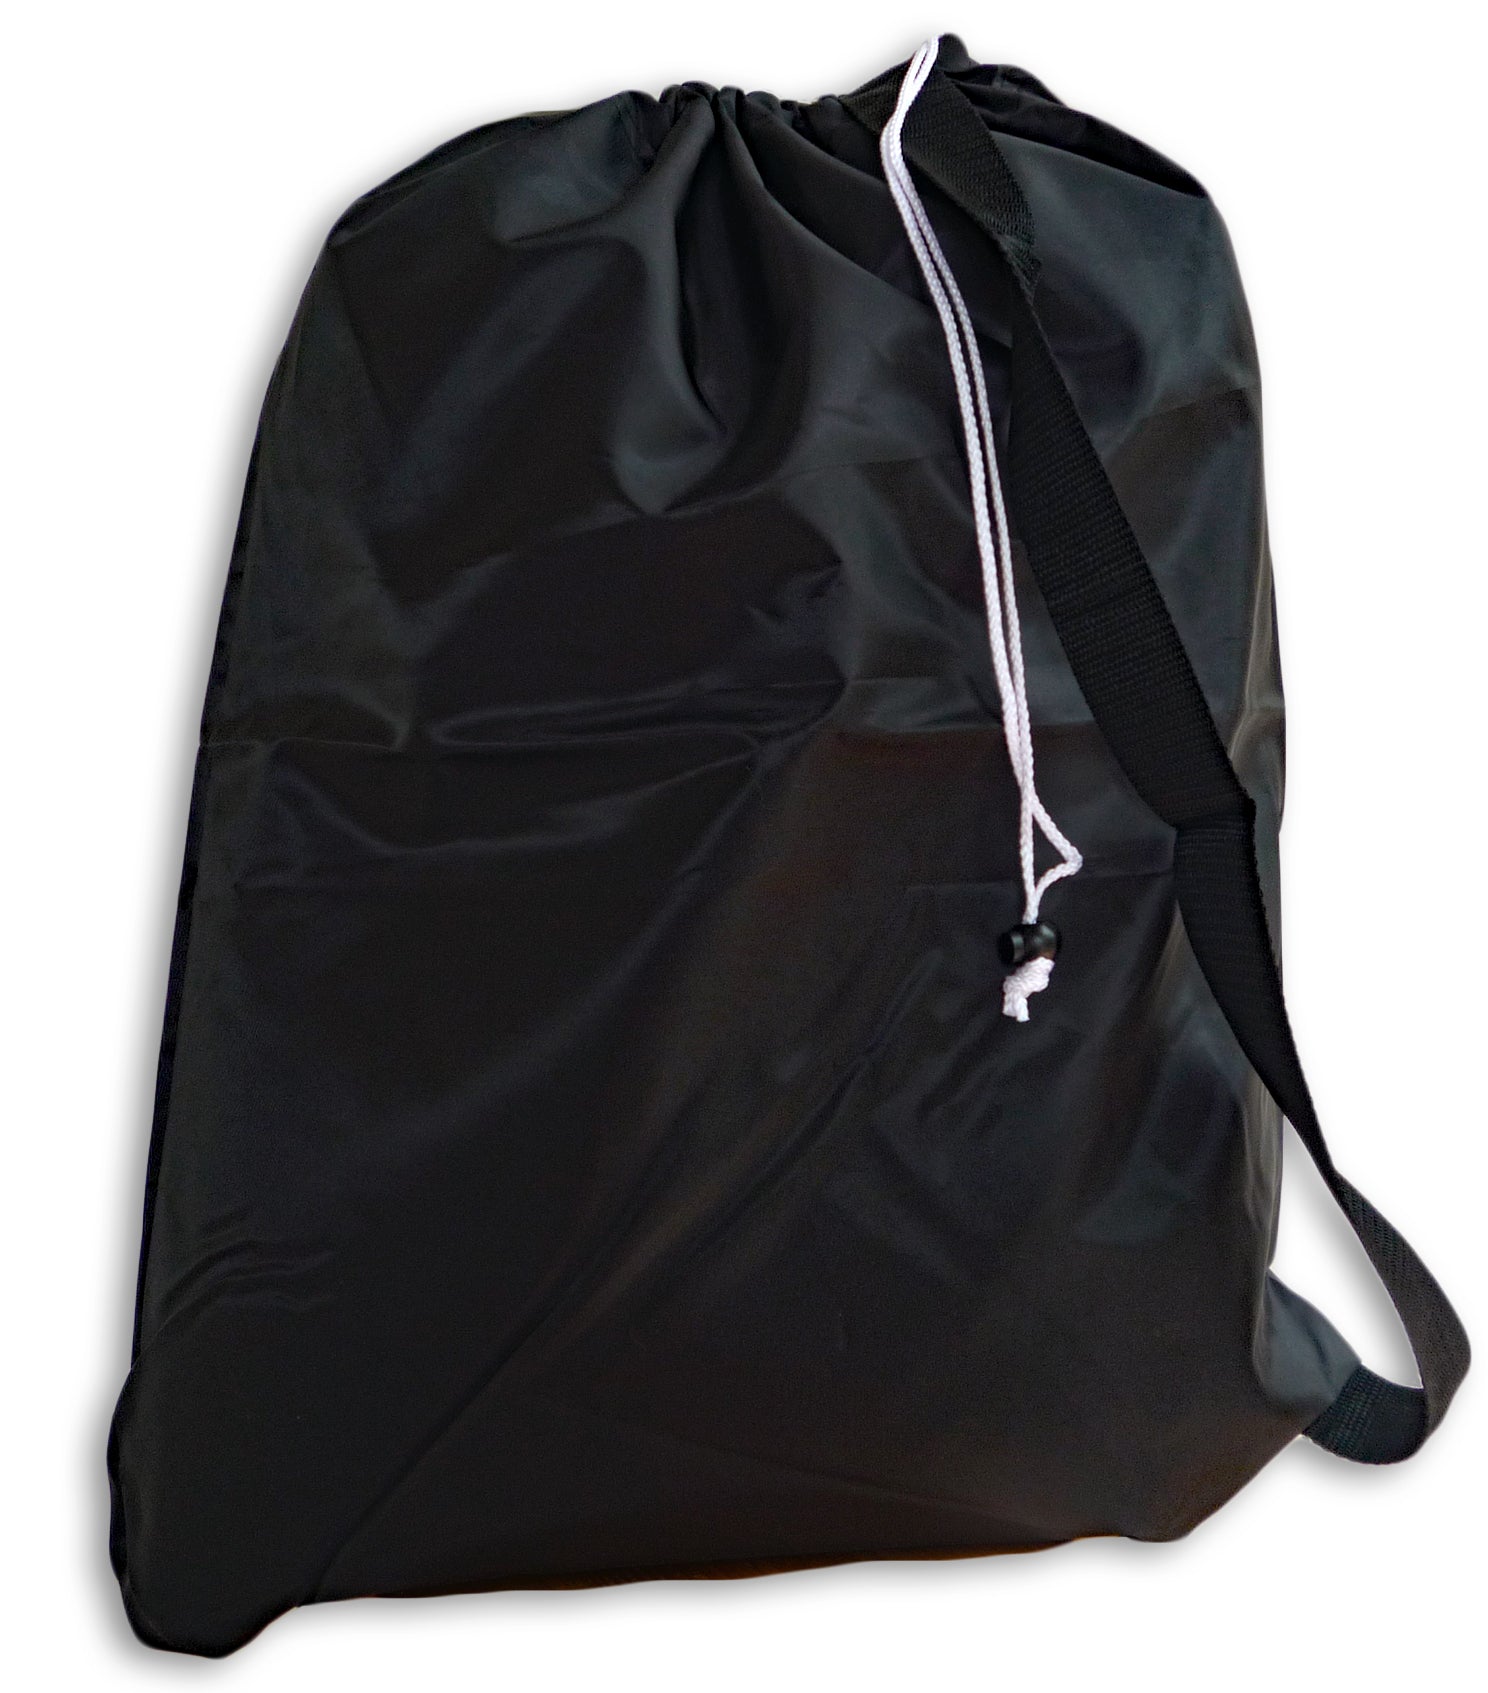 Small Laundry Bag with Strap, Black